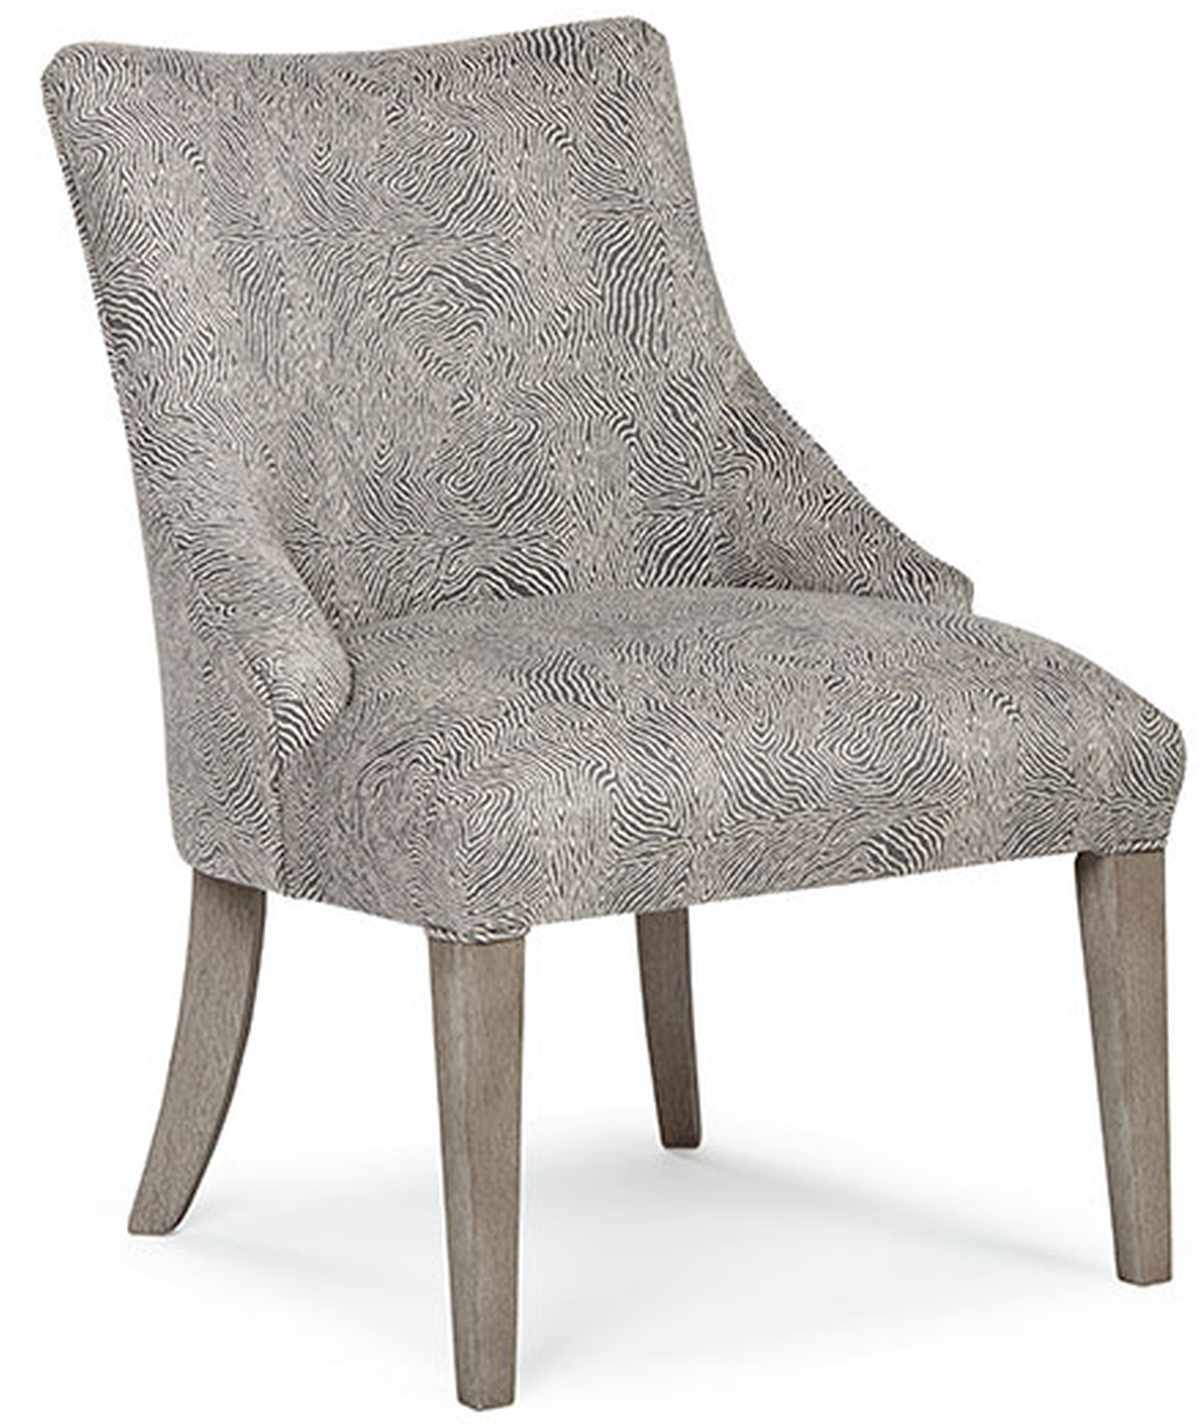 Best™ Home Furnishings Elie Dining Chair